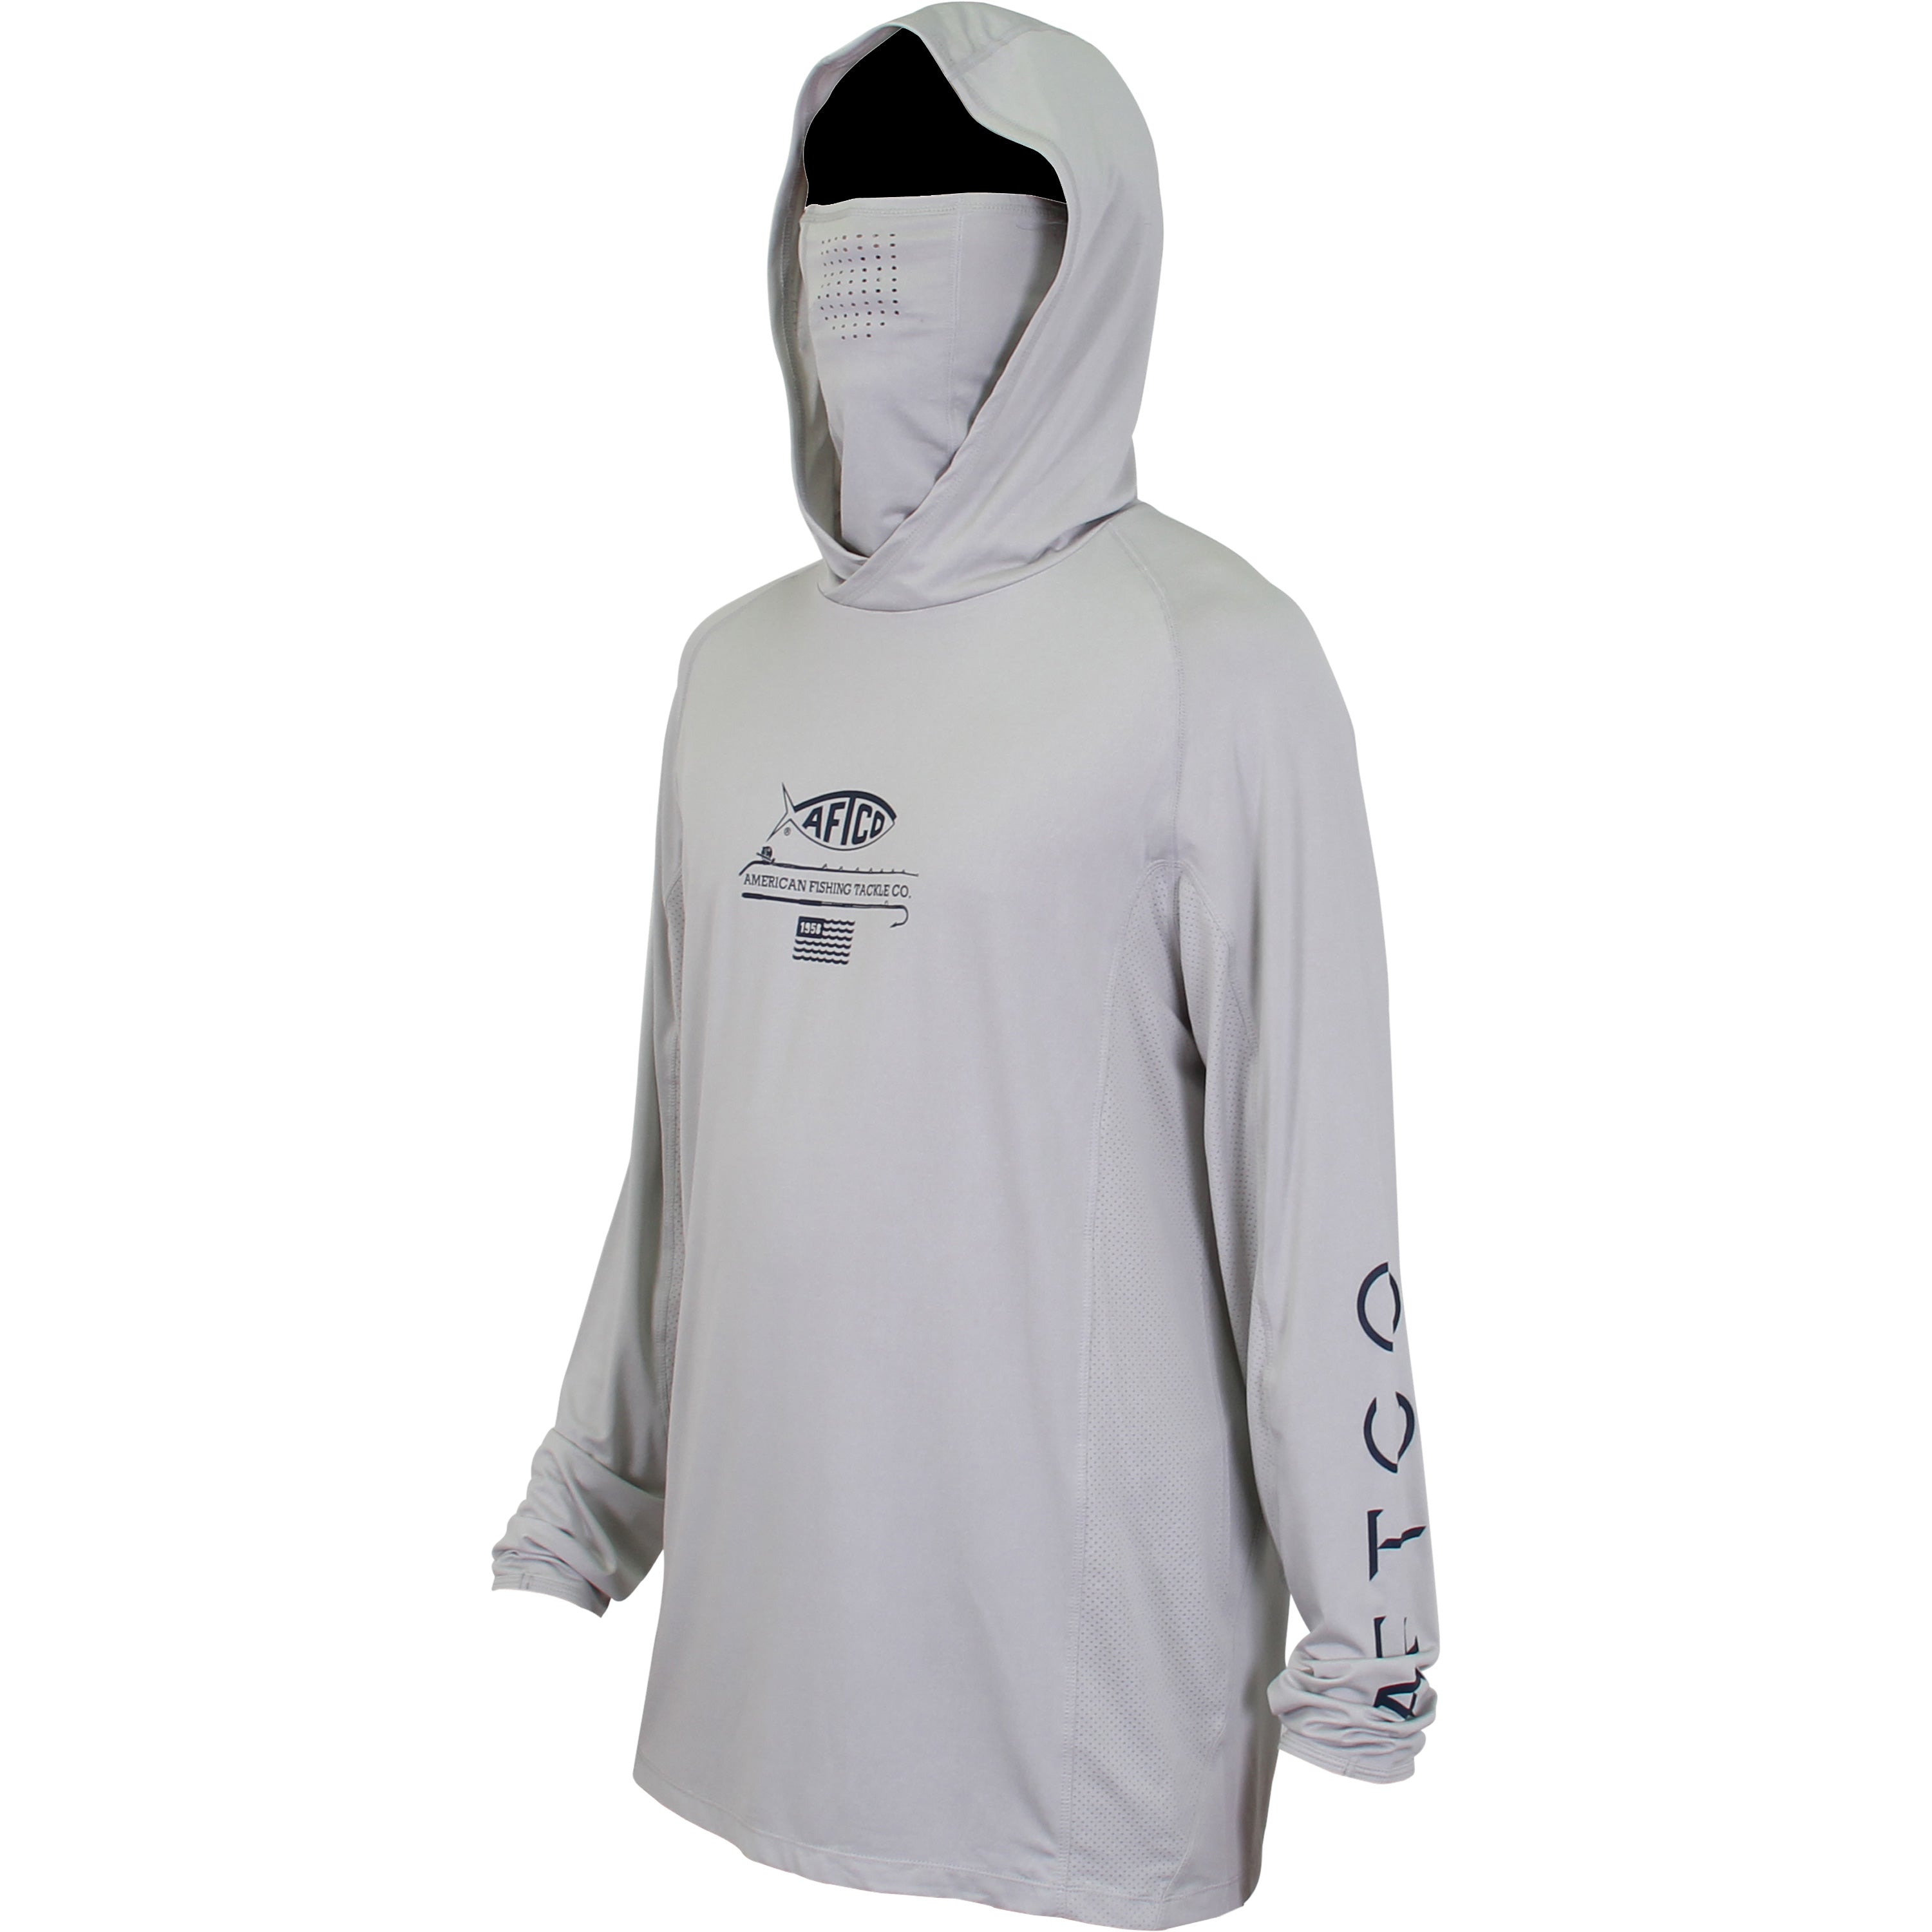 Long Sleeves & Hoodies for the Outdoors - Free Shipping